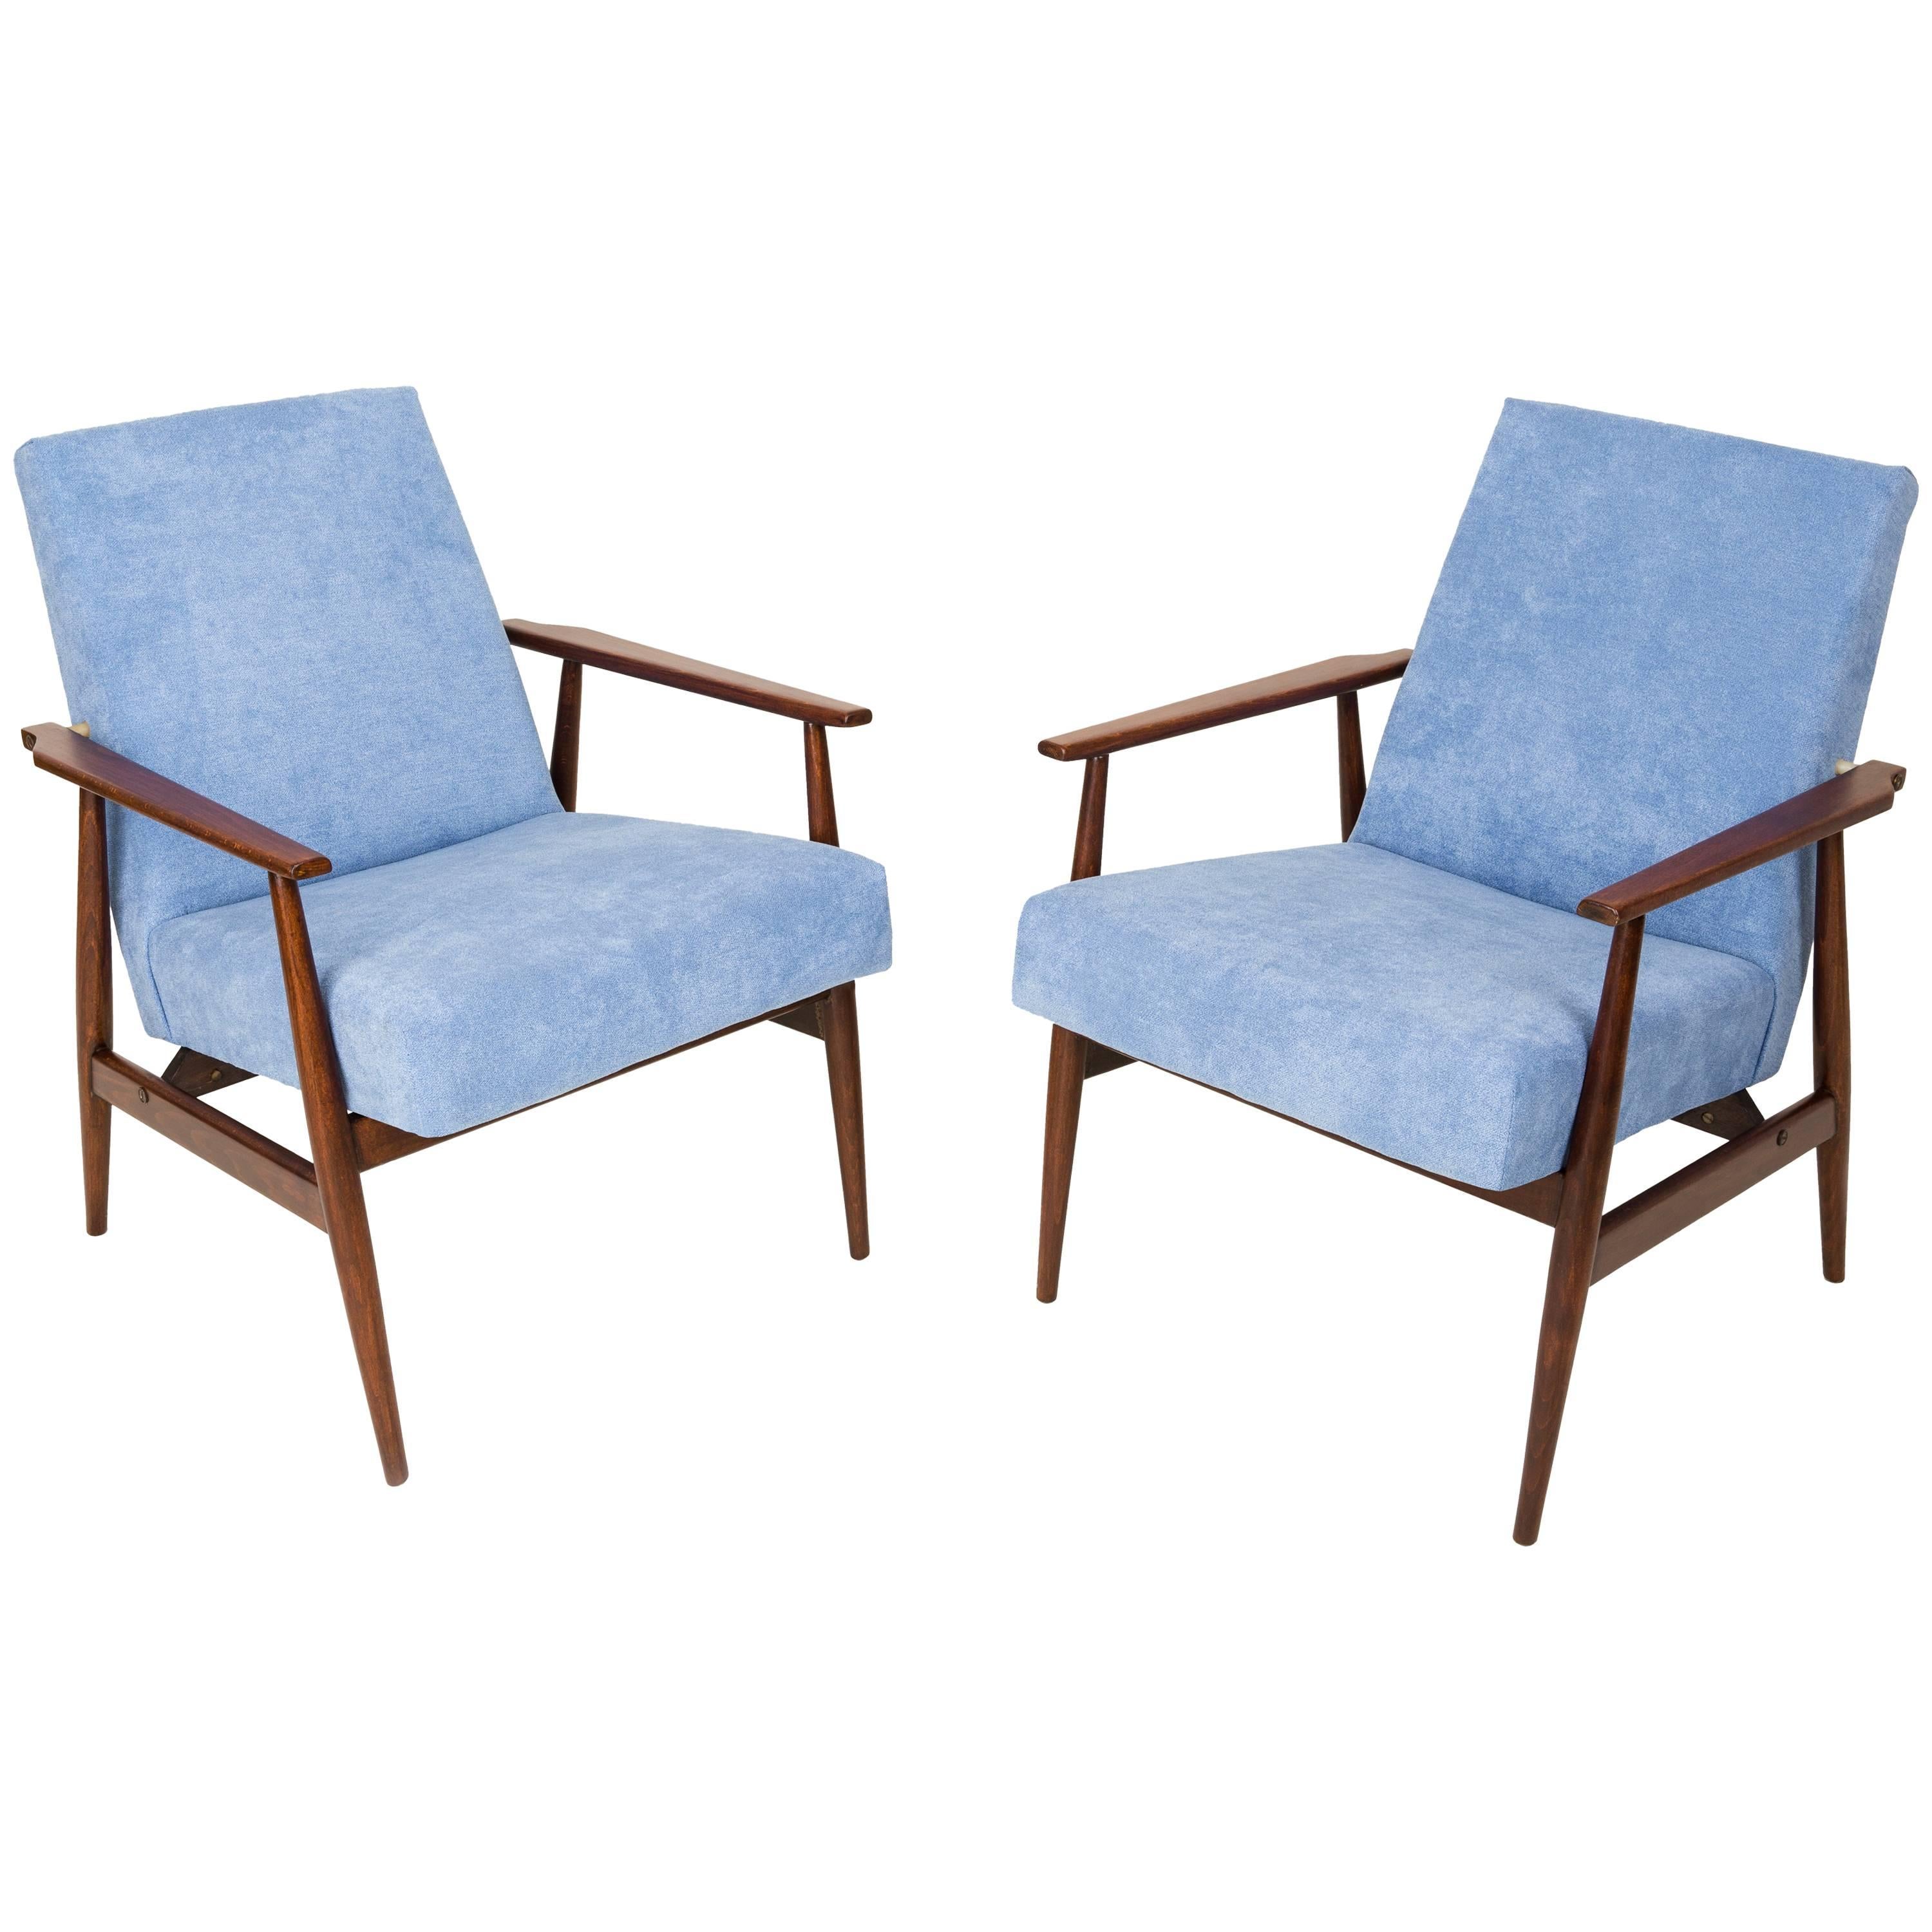 20th Century Pair of Baby Blue Dante Armchairs, H. Lis, 1960s For Sale